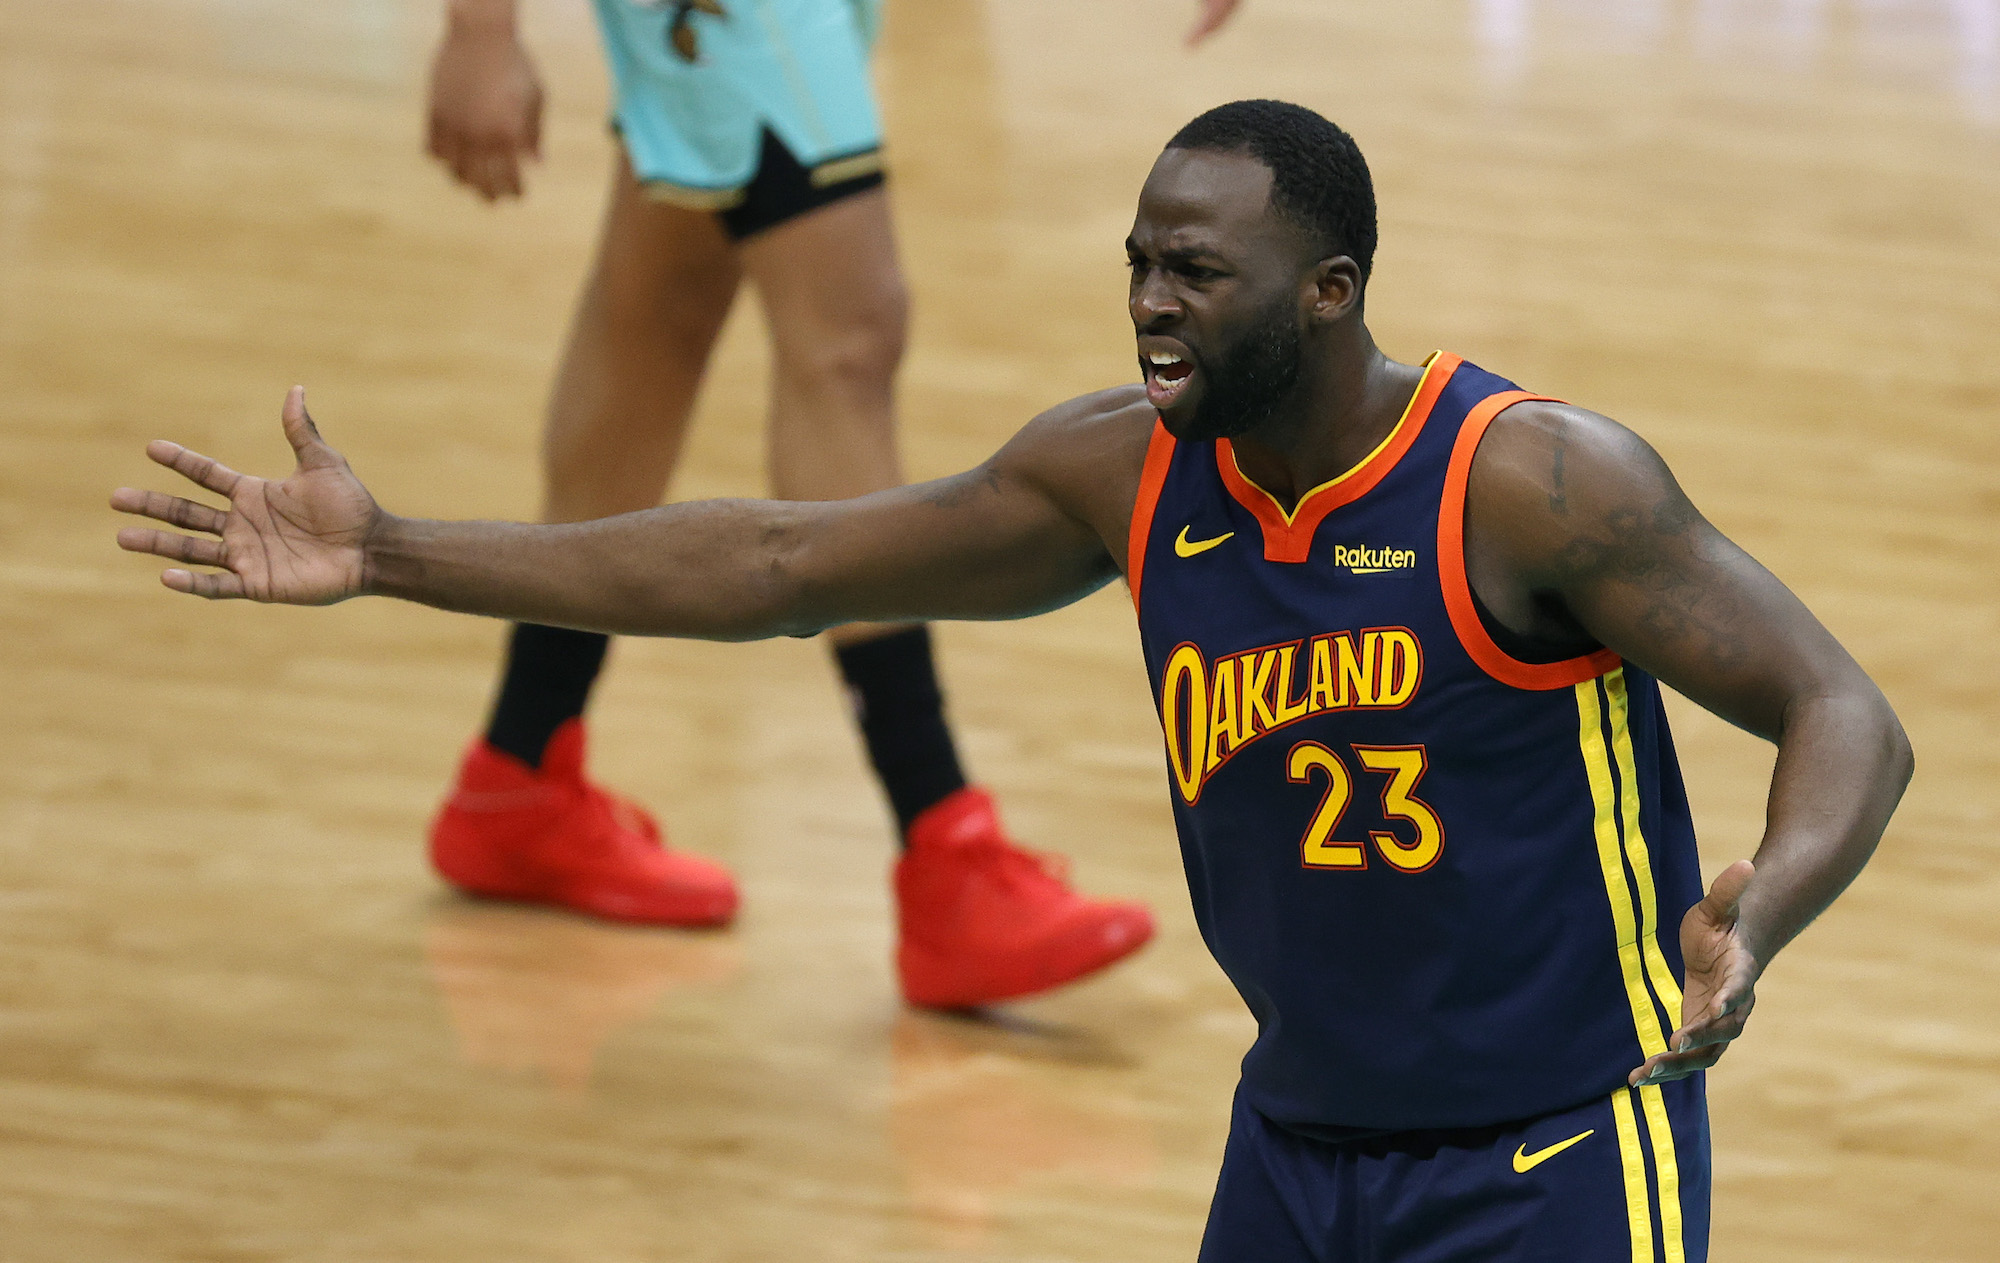 CHARLOTTE, NORTH CAROLINA - FEBRUARY 20: Draymond Green #23 of the Golden State Warriors reacts following a call during the fourth quarter of their game against the Charlotte Hornets at Spectrum Center on February 20, 2021 in Charlotte, North Carolina. NOTE TO USER: User expressly acknowledges and agrees that, by downloading and or using this photograph, User is consenting to the terms and conditions of the Getty Images License Agreement. (Photo by Jared C. Tilton/Getty Images)